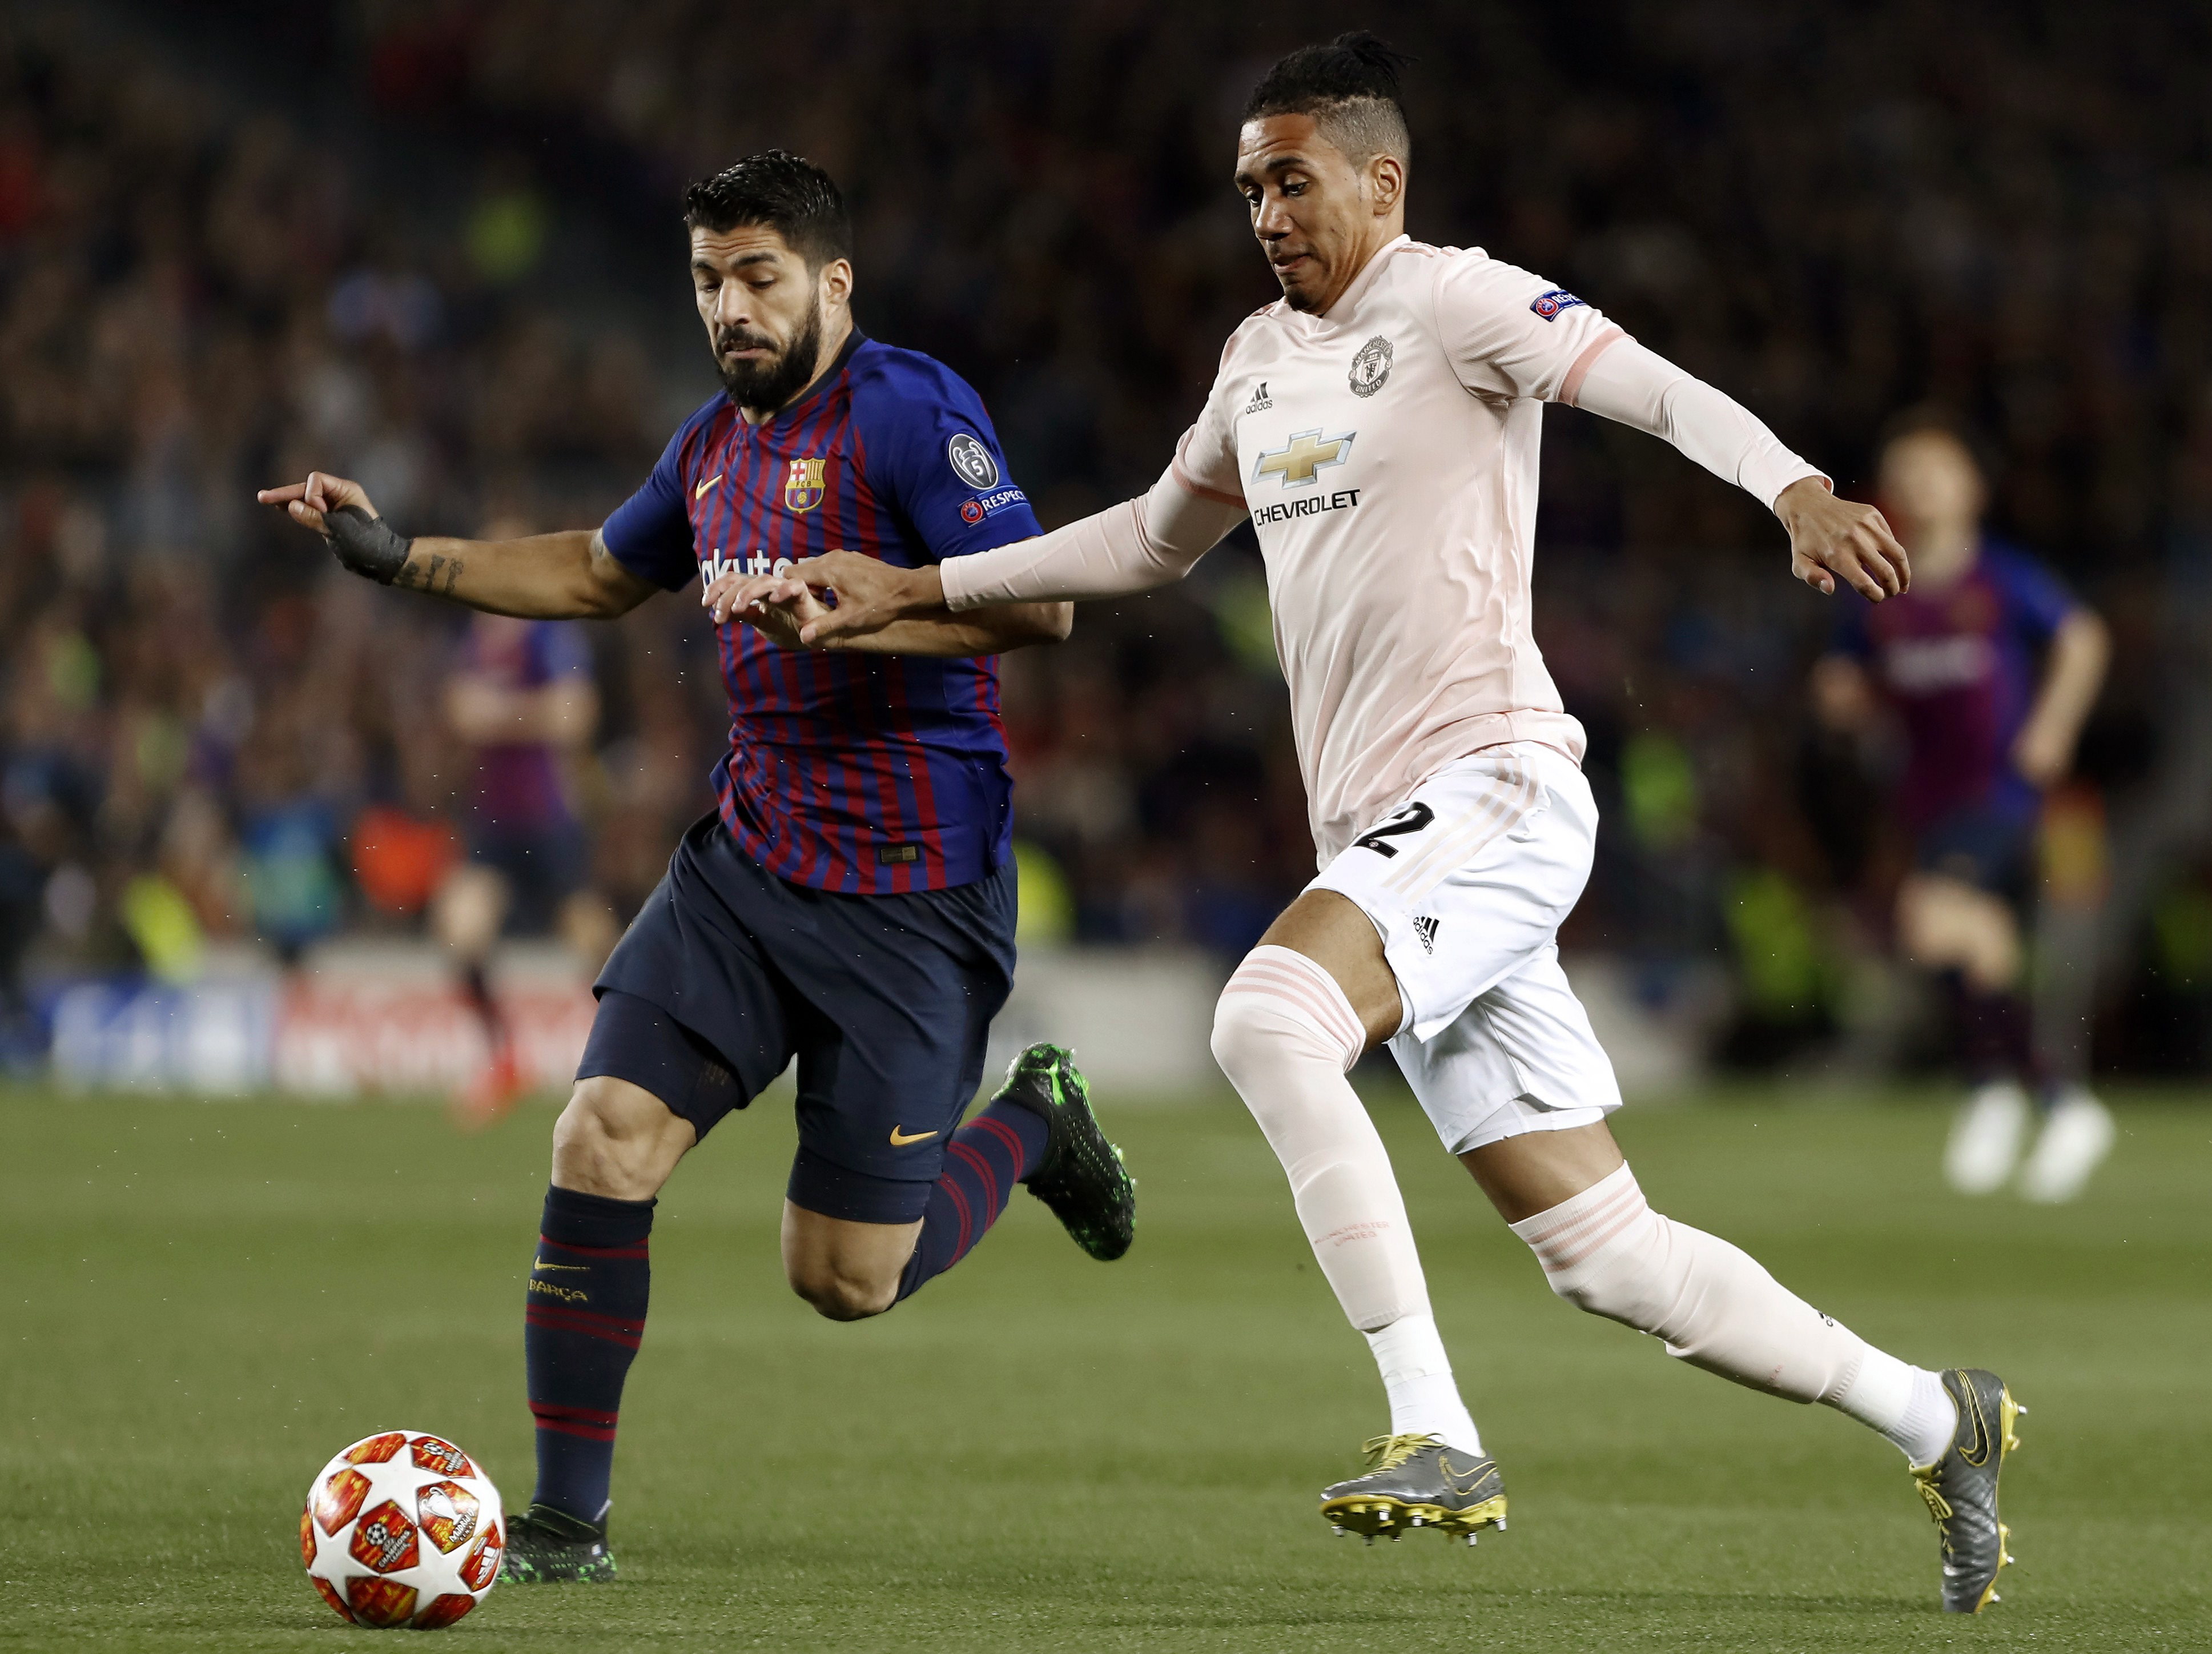 epa07510788 FC Barcelona's forward Luis Suarez (L) vies for the ball against Manchester United's defender Chris Smalling (R) during the UEFA Champions League quarter-final second leg match between FC Barcelona and Manchester United at Camp Nou stadium in Barcelona, Catalonia, Spain, 16 April 2019.  EPA/Andreu Dalmau